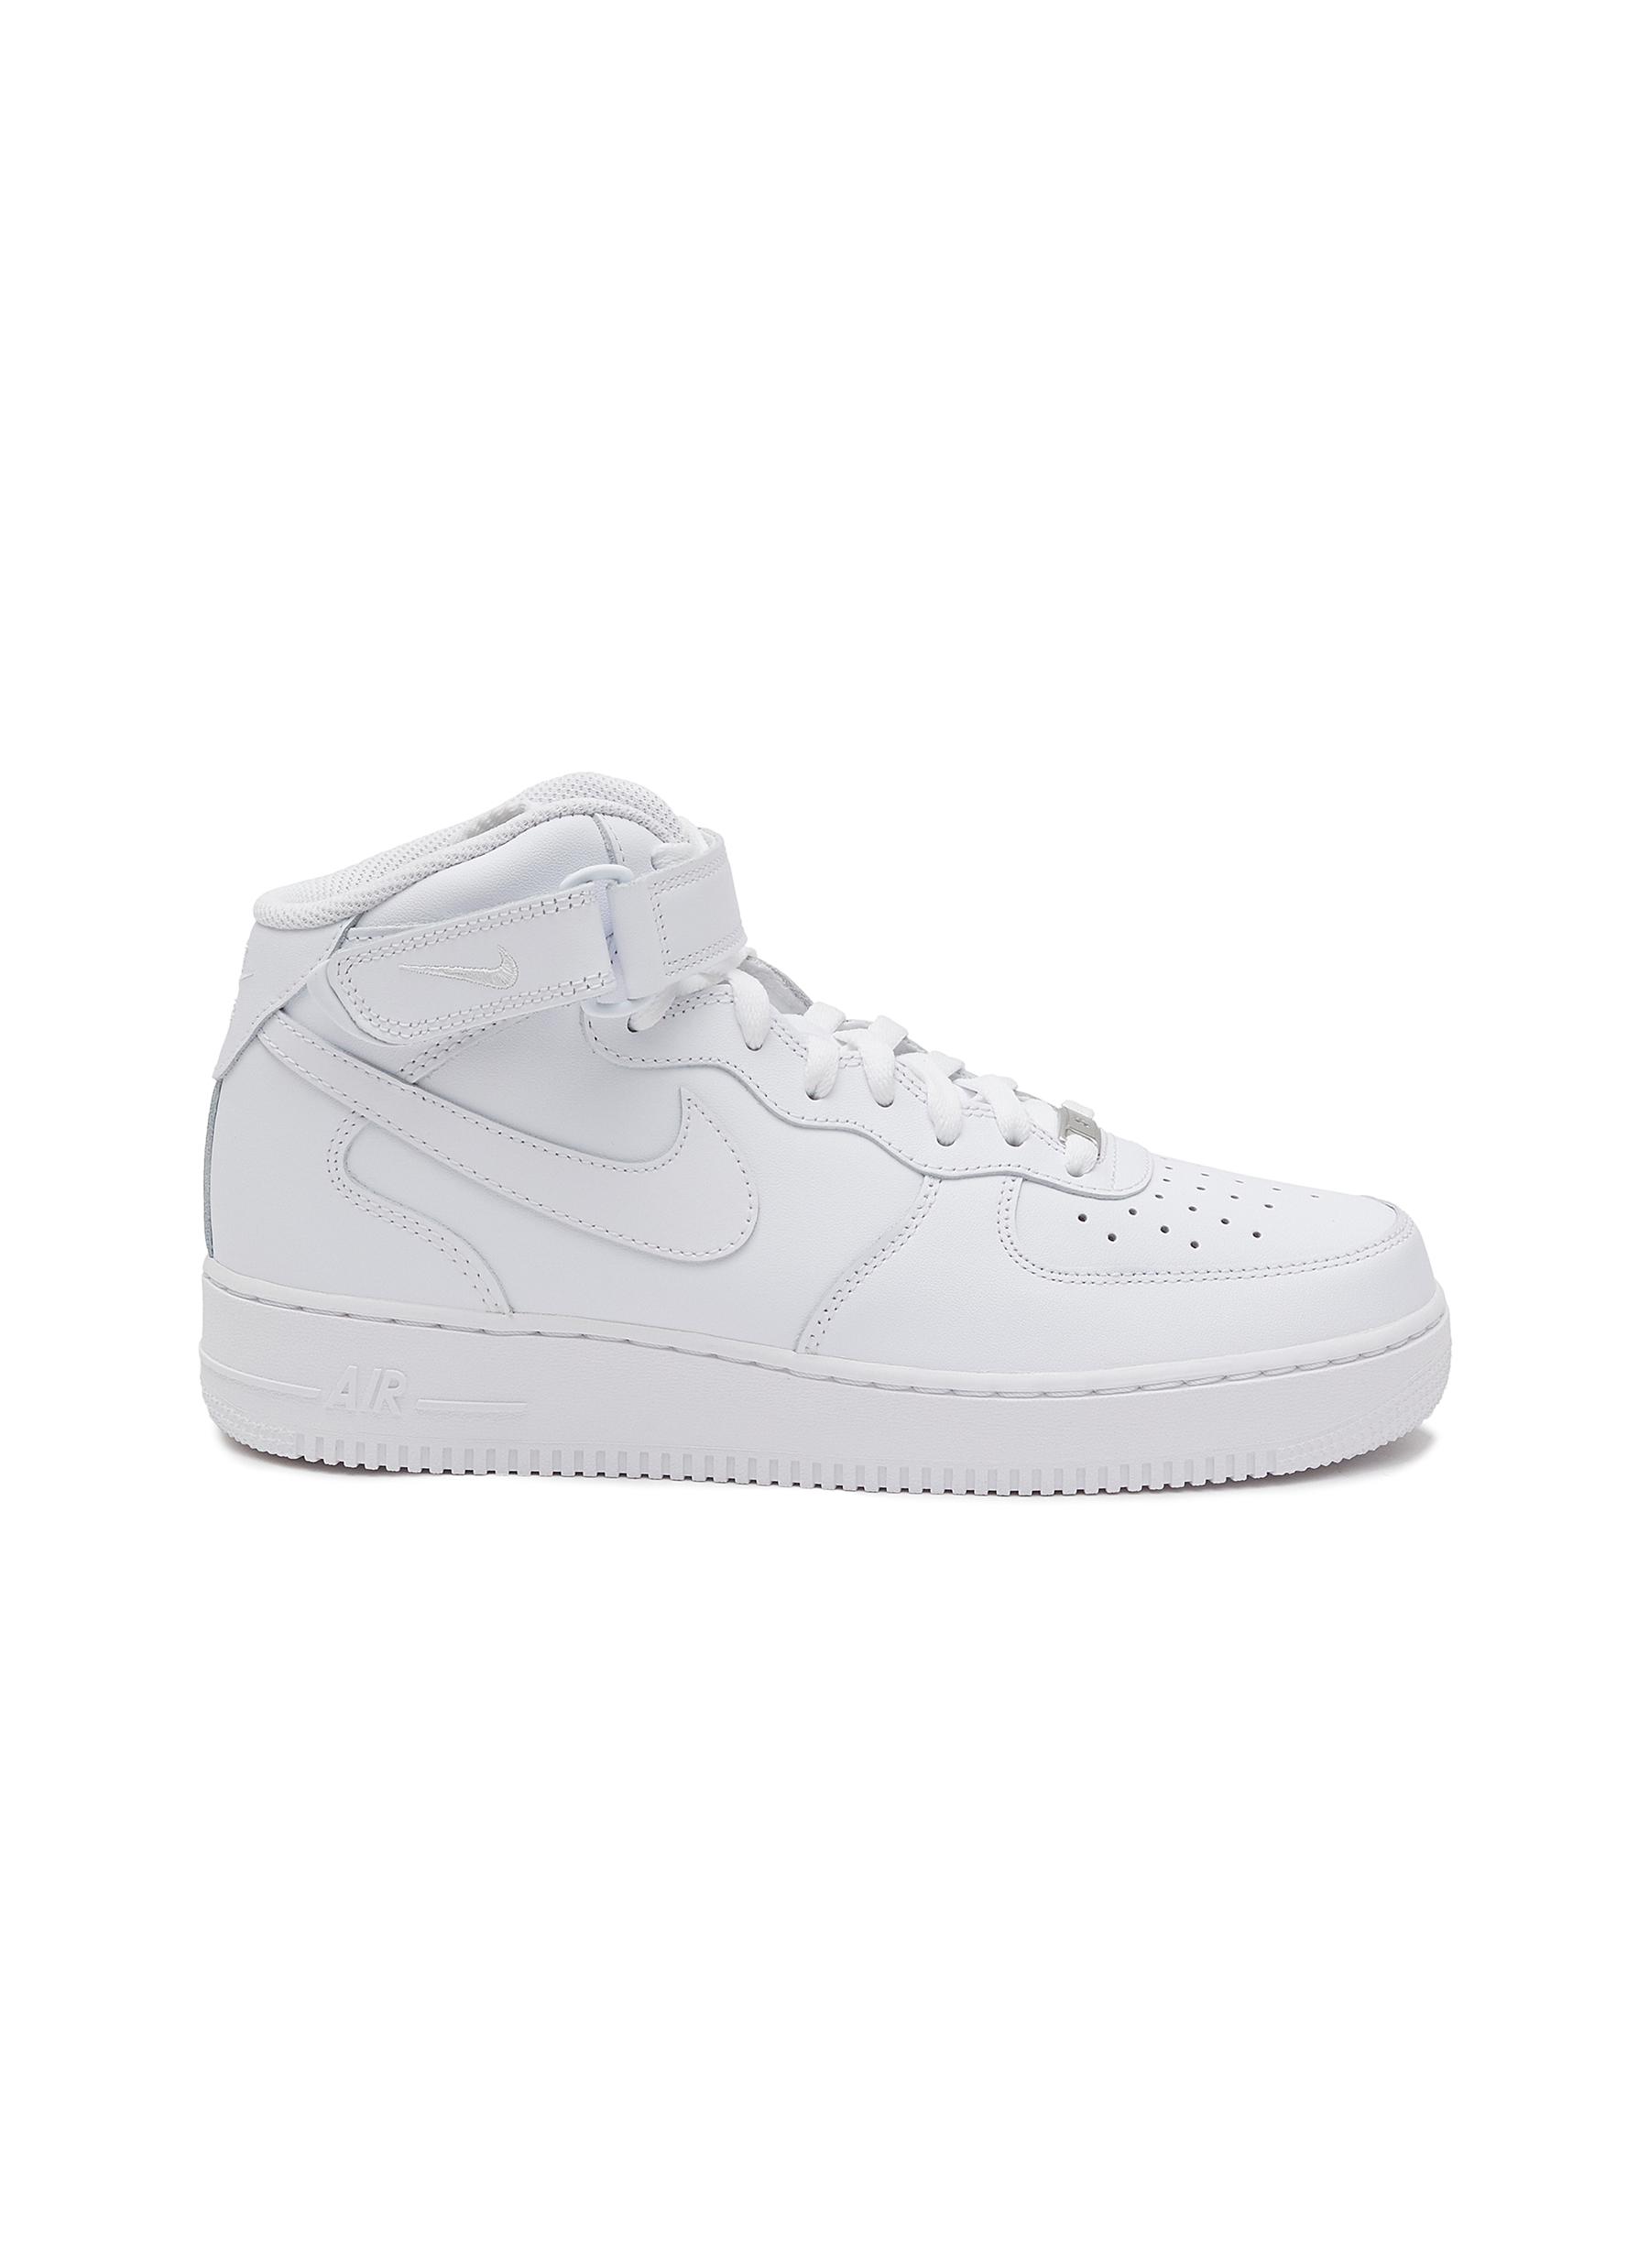 NIKE, 'AIR FORCE 1 MID '07' HIGH TOP LACE UP SNEAKERS